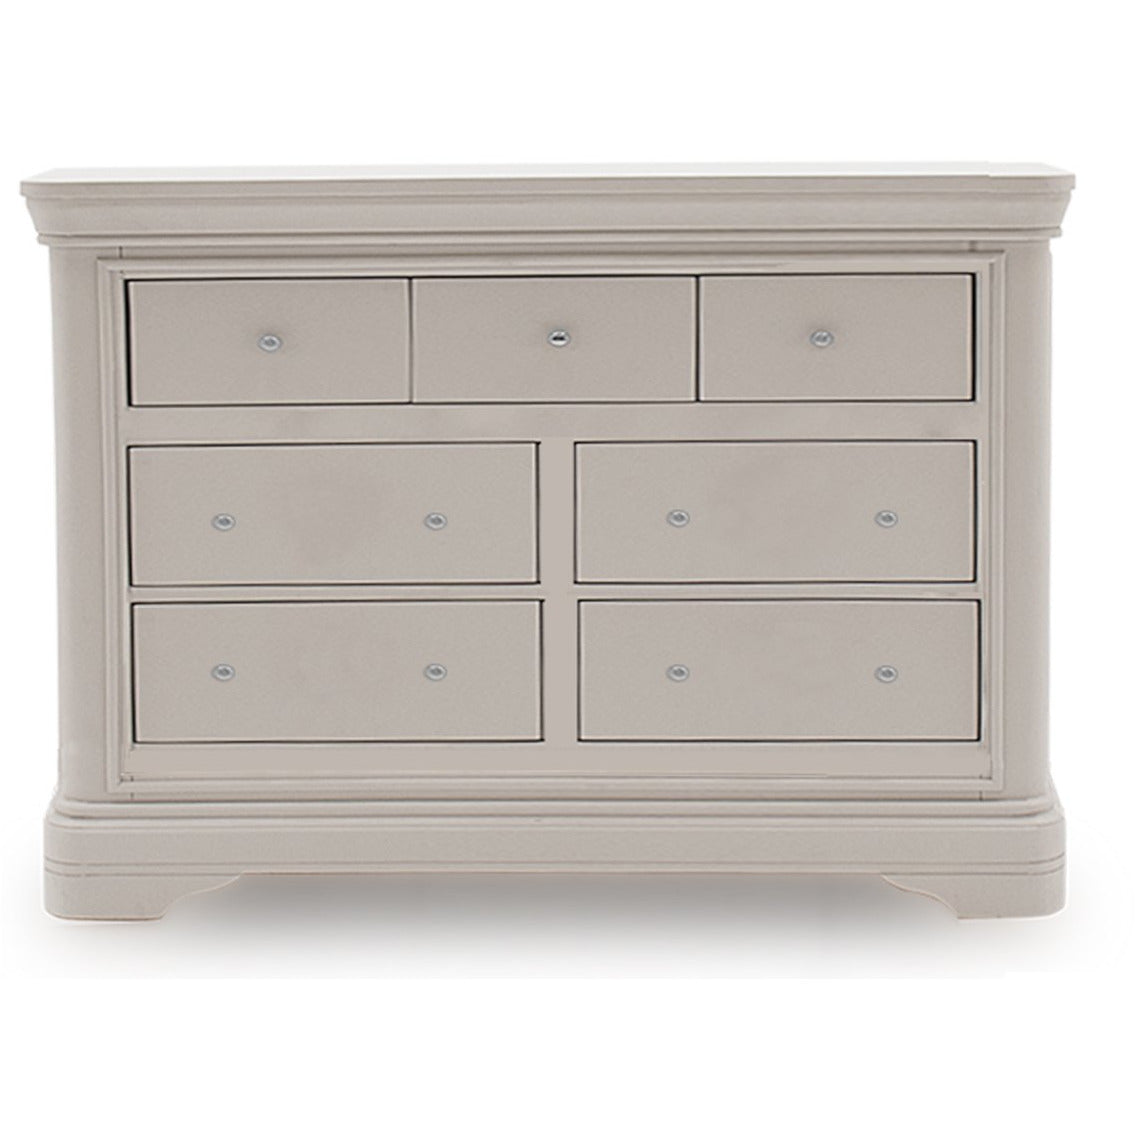 Mabel Dressing Chest from Upstairs Downstairs Furniture in Lisburn, Enniskillen and Monaghan, Ireland.